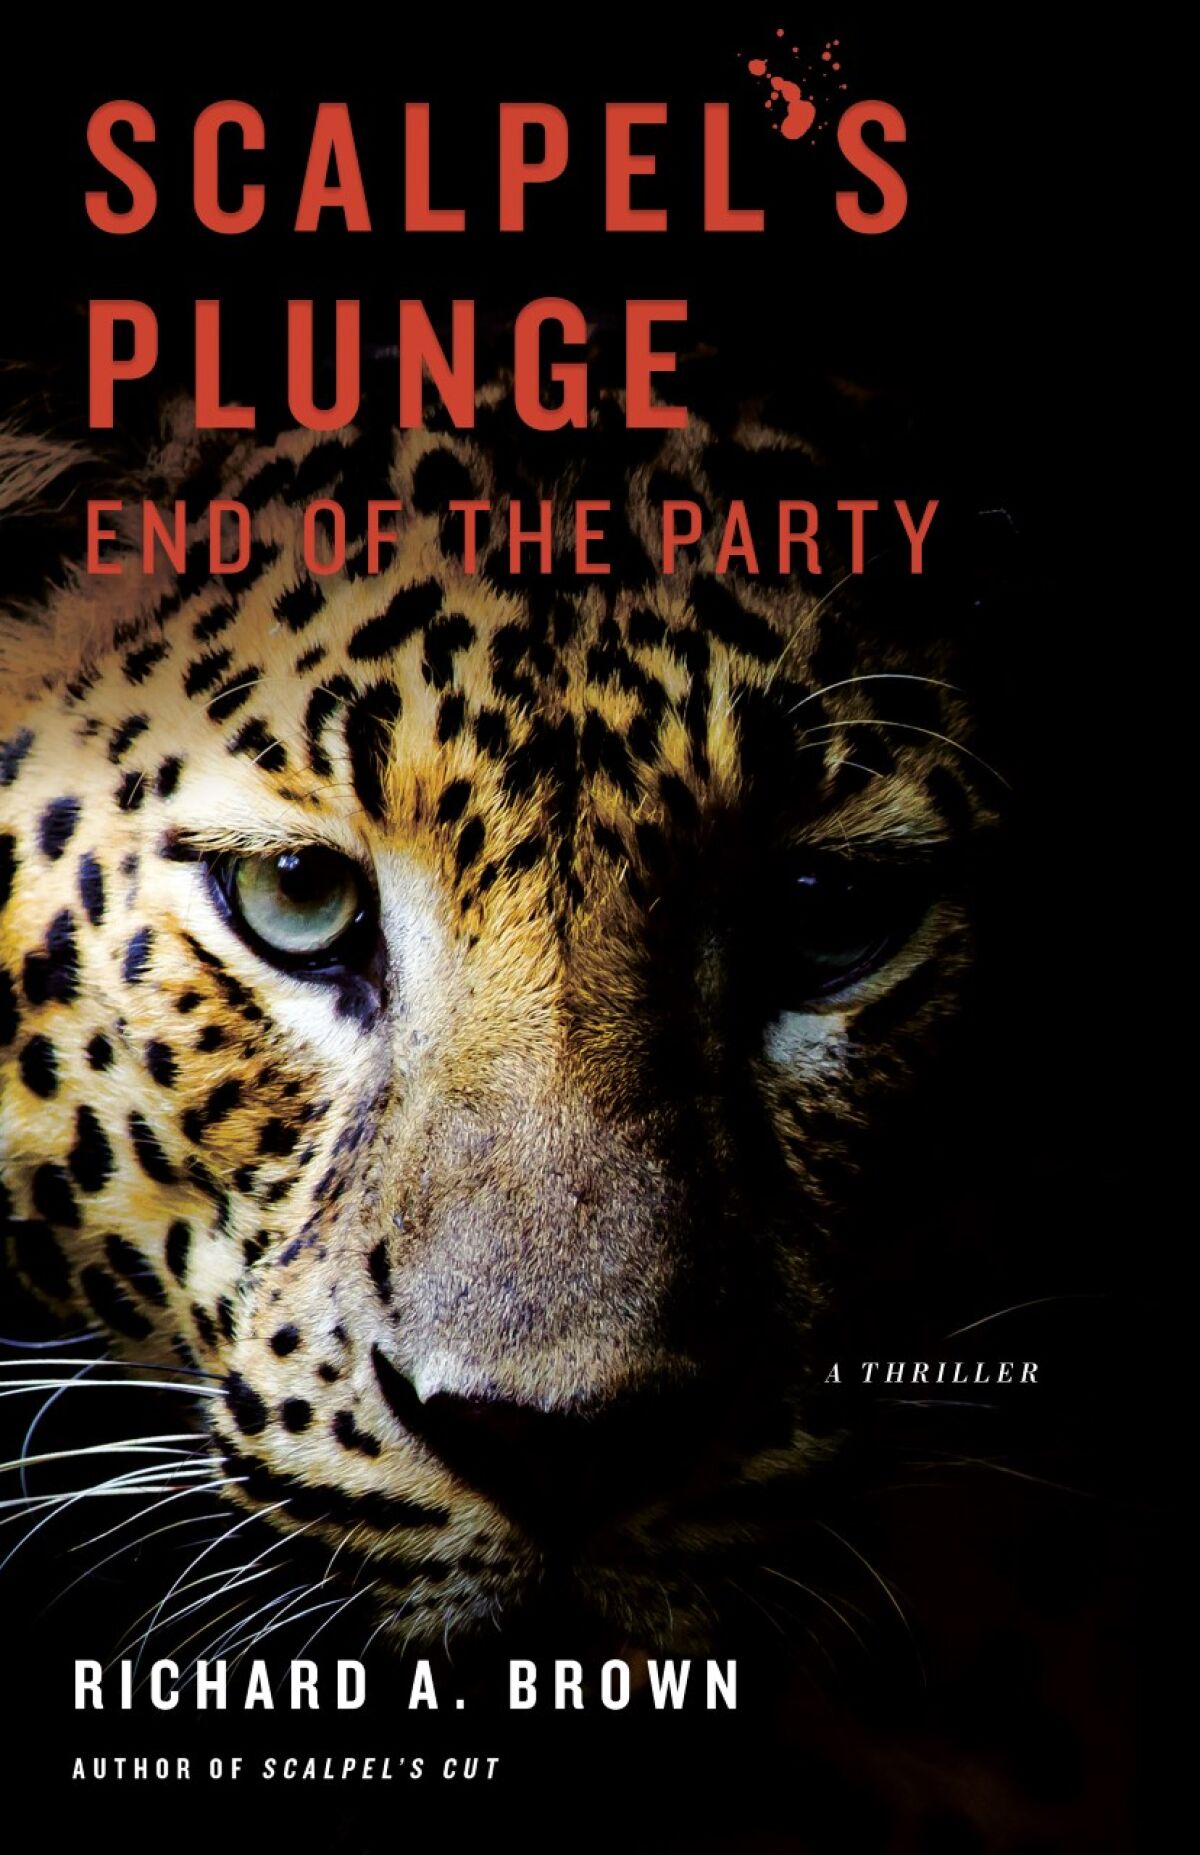 “Scalpel’s Plunge: End of the Party” is Dr. Richard Brown's second novel.